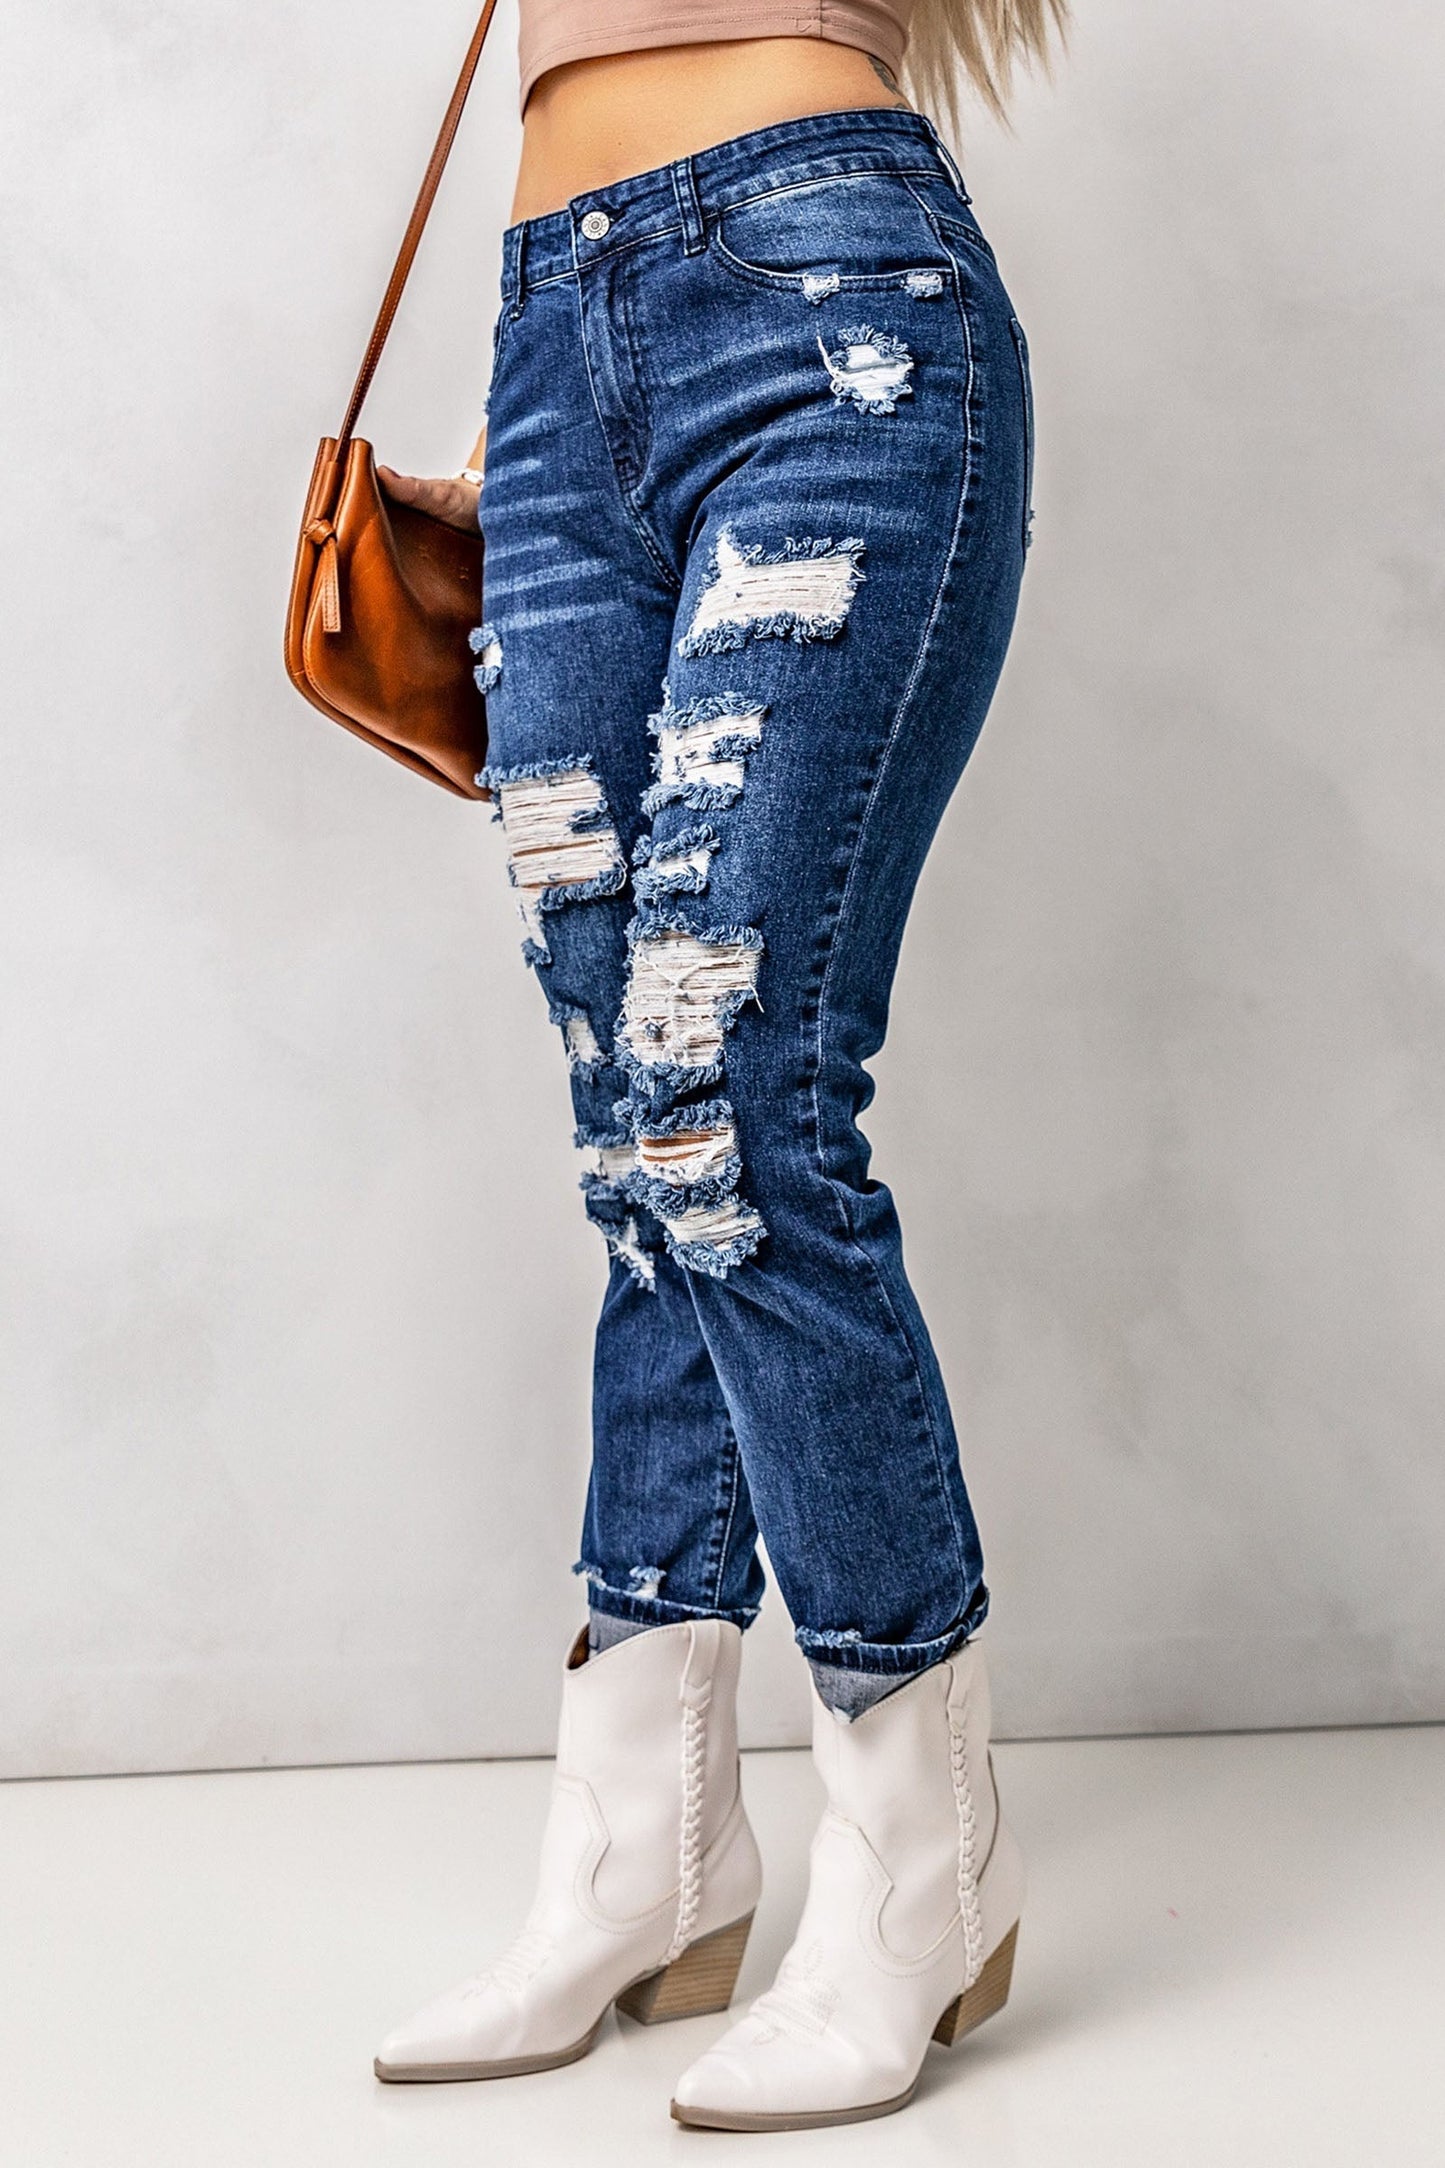 Distressed High Waist Jeans with Pockets Print on any thing USA/STOD clothes